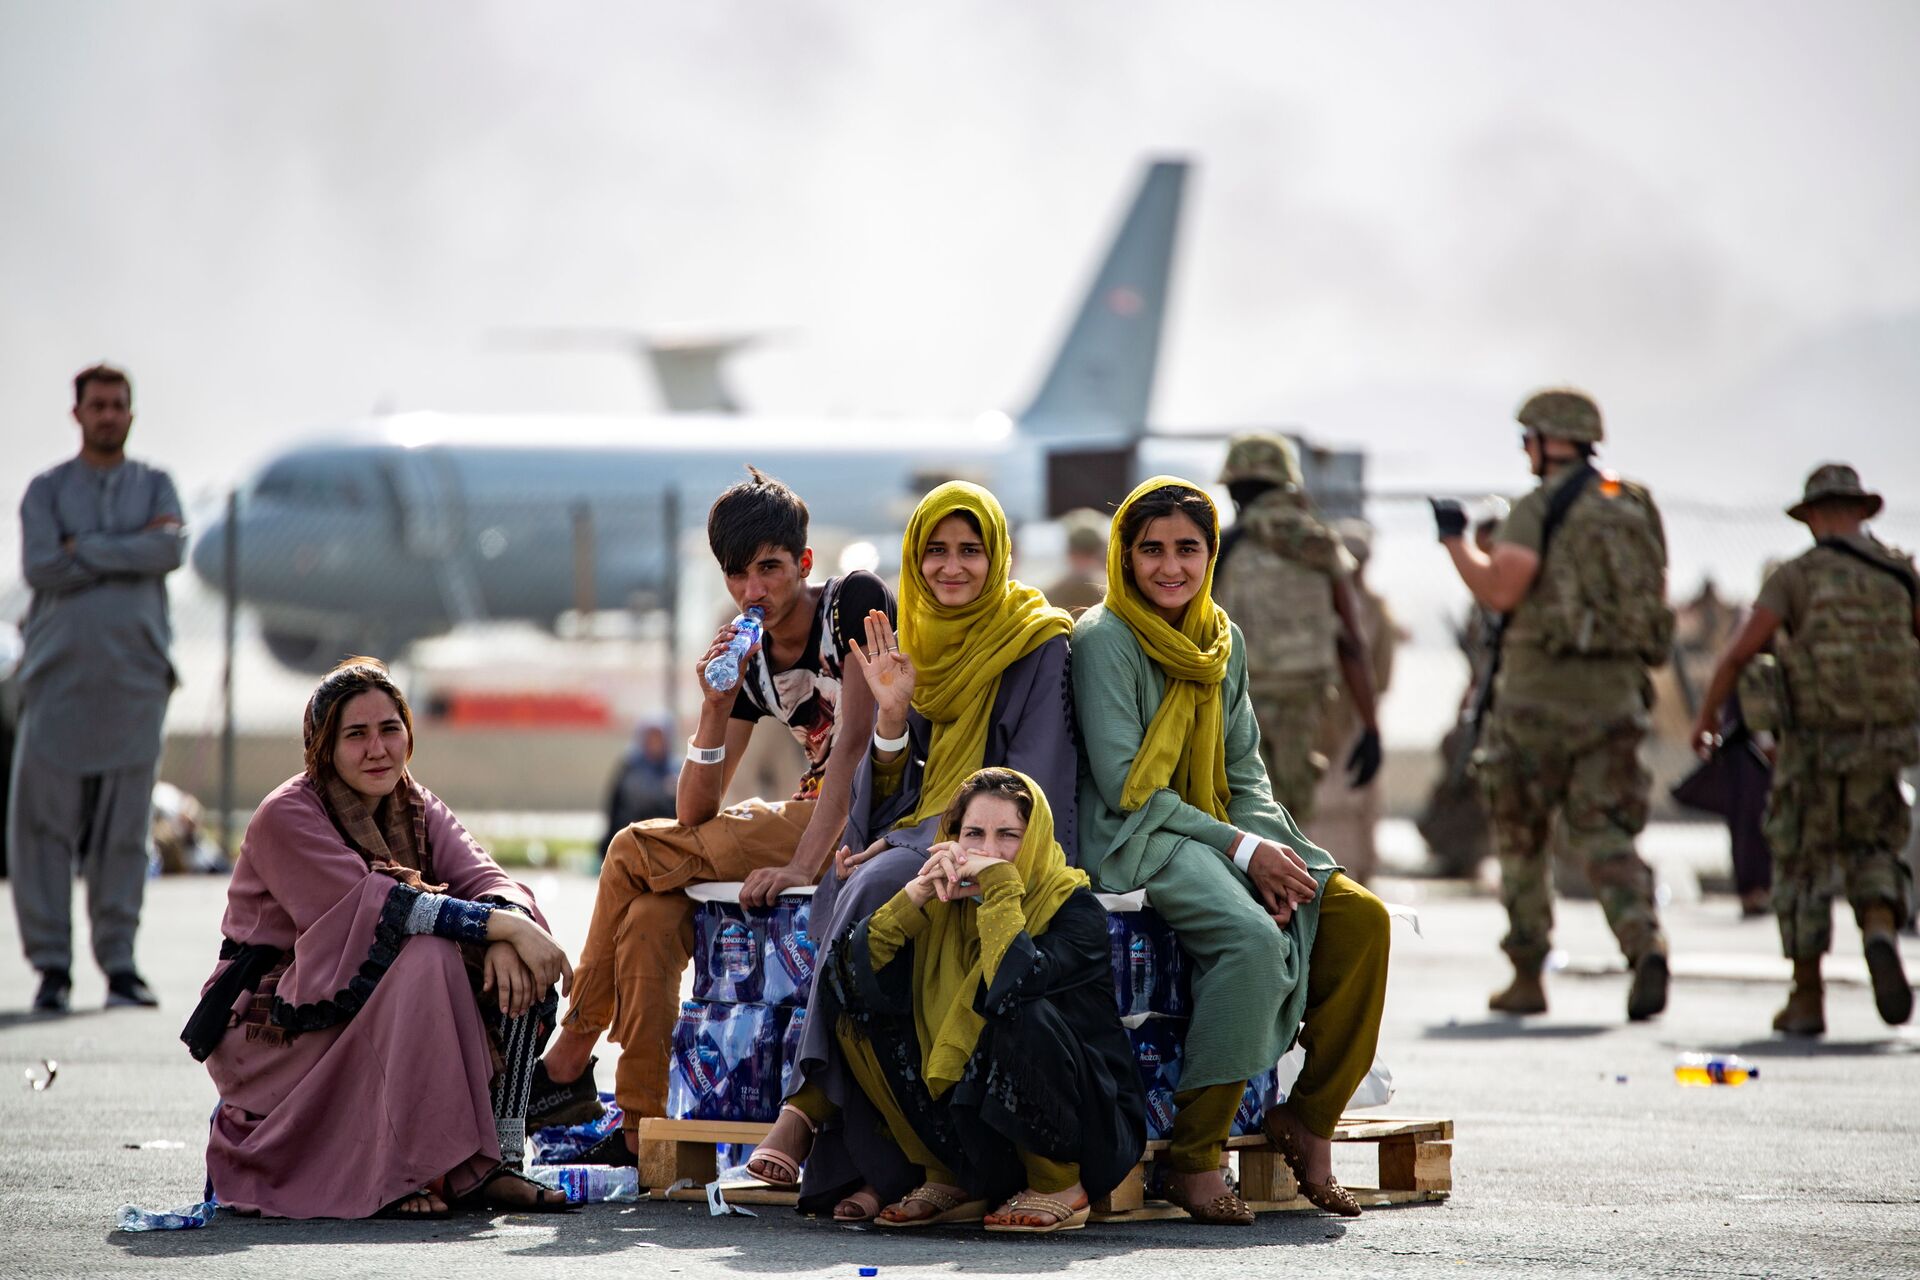 Evacuee children wait for the next flight after being manifested at Hamid Karzai International Airport, in Kabul, Afghanistan, August 19, 2021 - Sputnik International, 1920, 15.09.2021